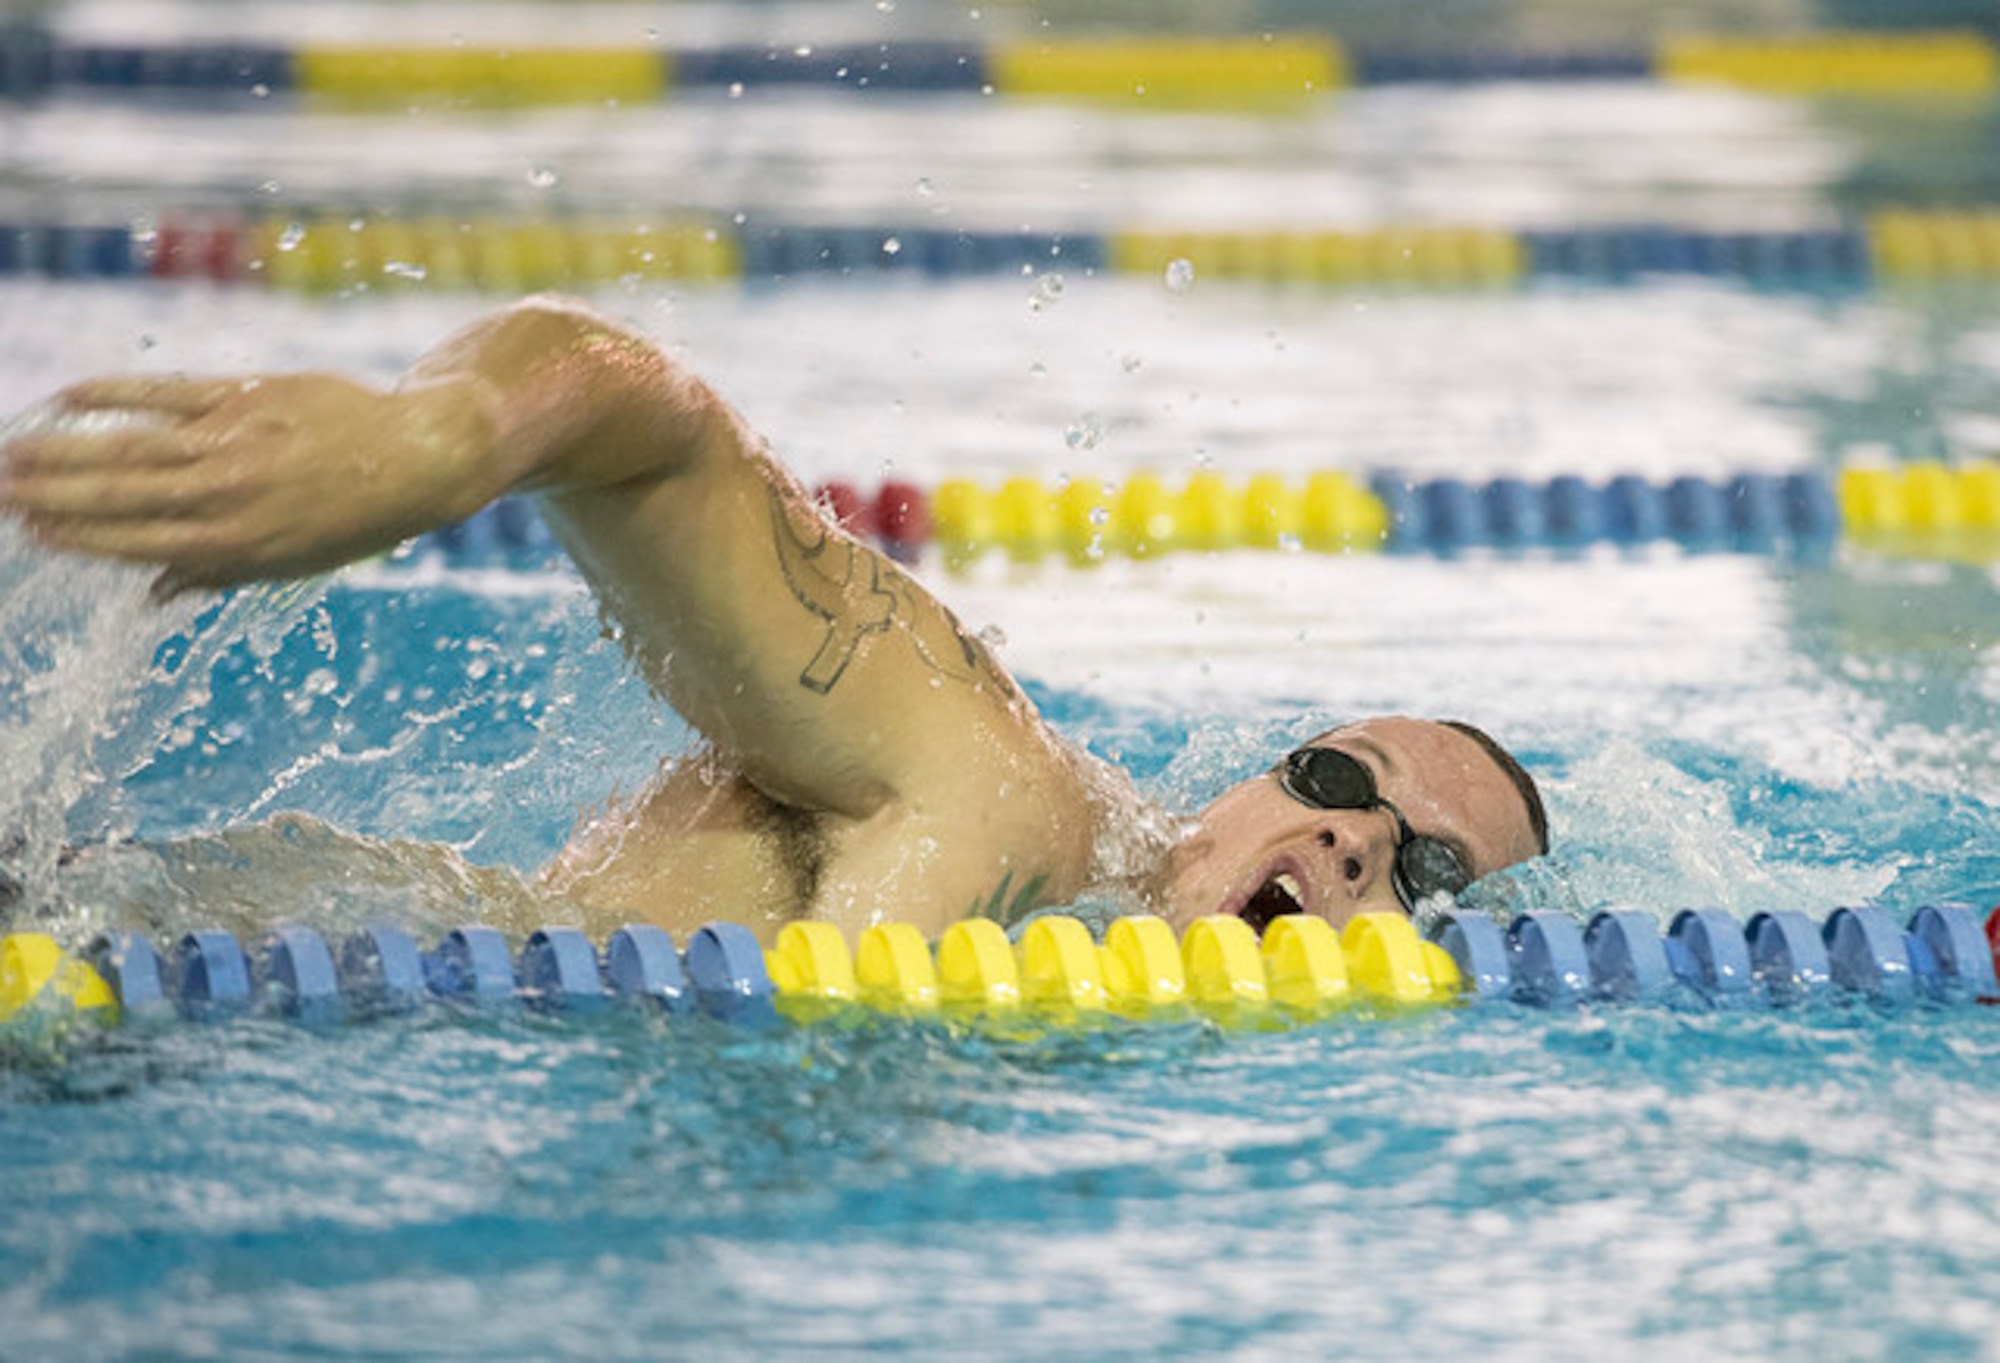 U.S. Marine Corps Gunnery Sgt. Dorian Gardner, training and operations chief with the Headquarters U.S. Marine Corps Training Command Public Affairs office, swims the freestyle during practice for the 2017 Invictus Games in Toronto, Canada, Sept. 22, 2017. Gardner is one of the nearly 80 athletes who comprise this year’s U.S. team. (U.S. Army photo by Pfc. Seara Marcsis)